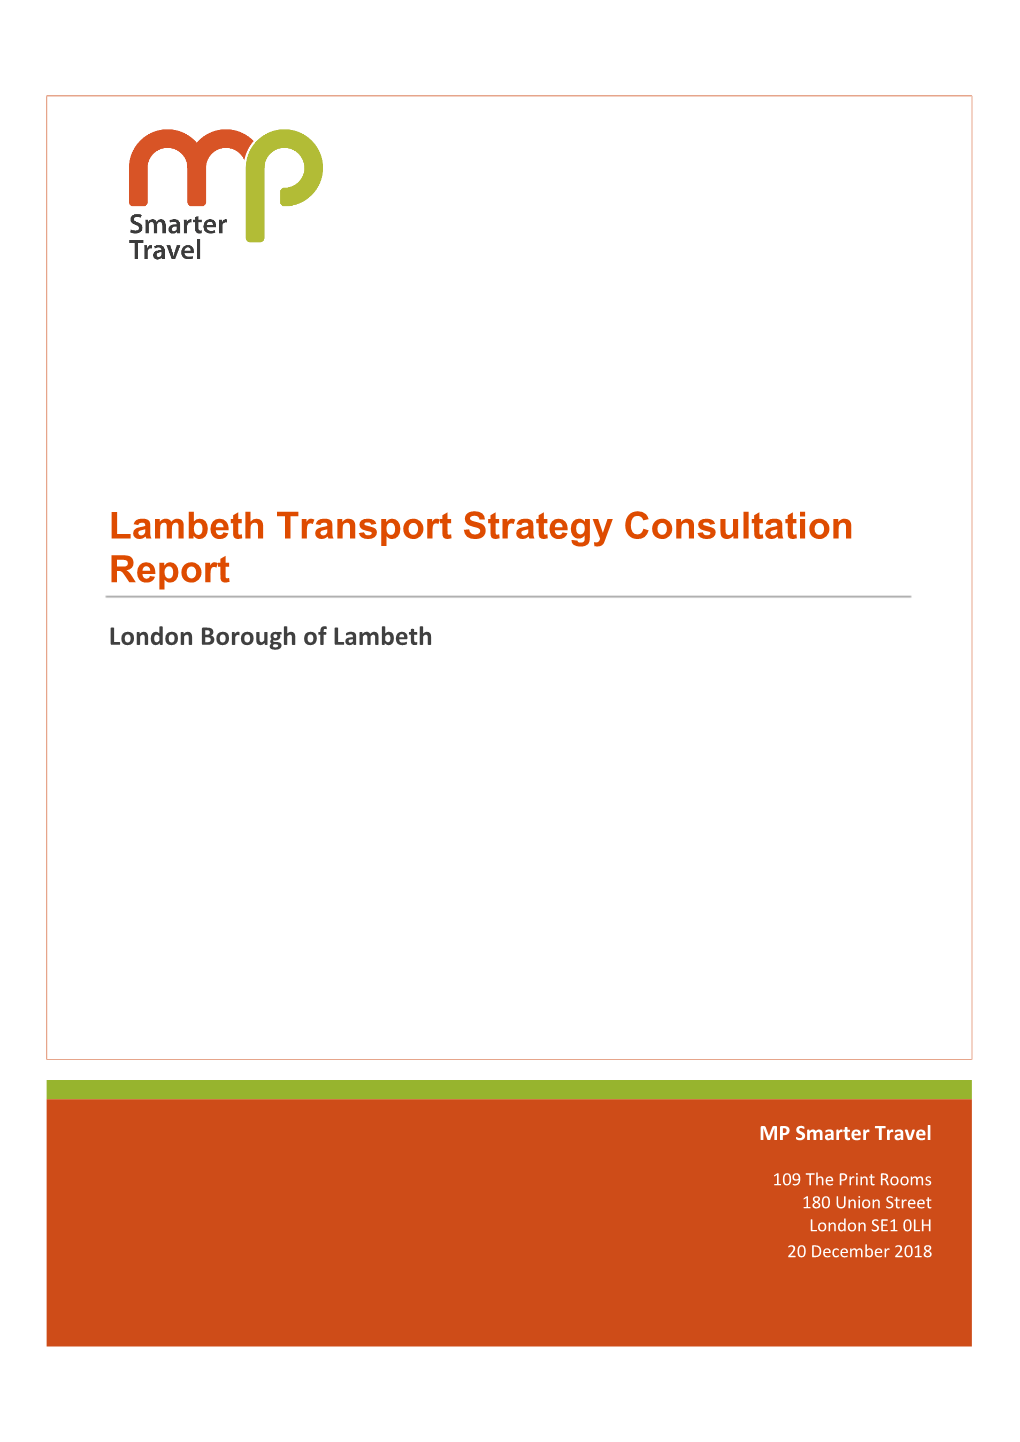 Draft Transport Strategy Consultation Report